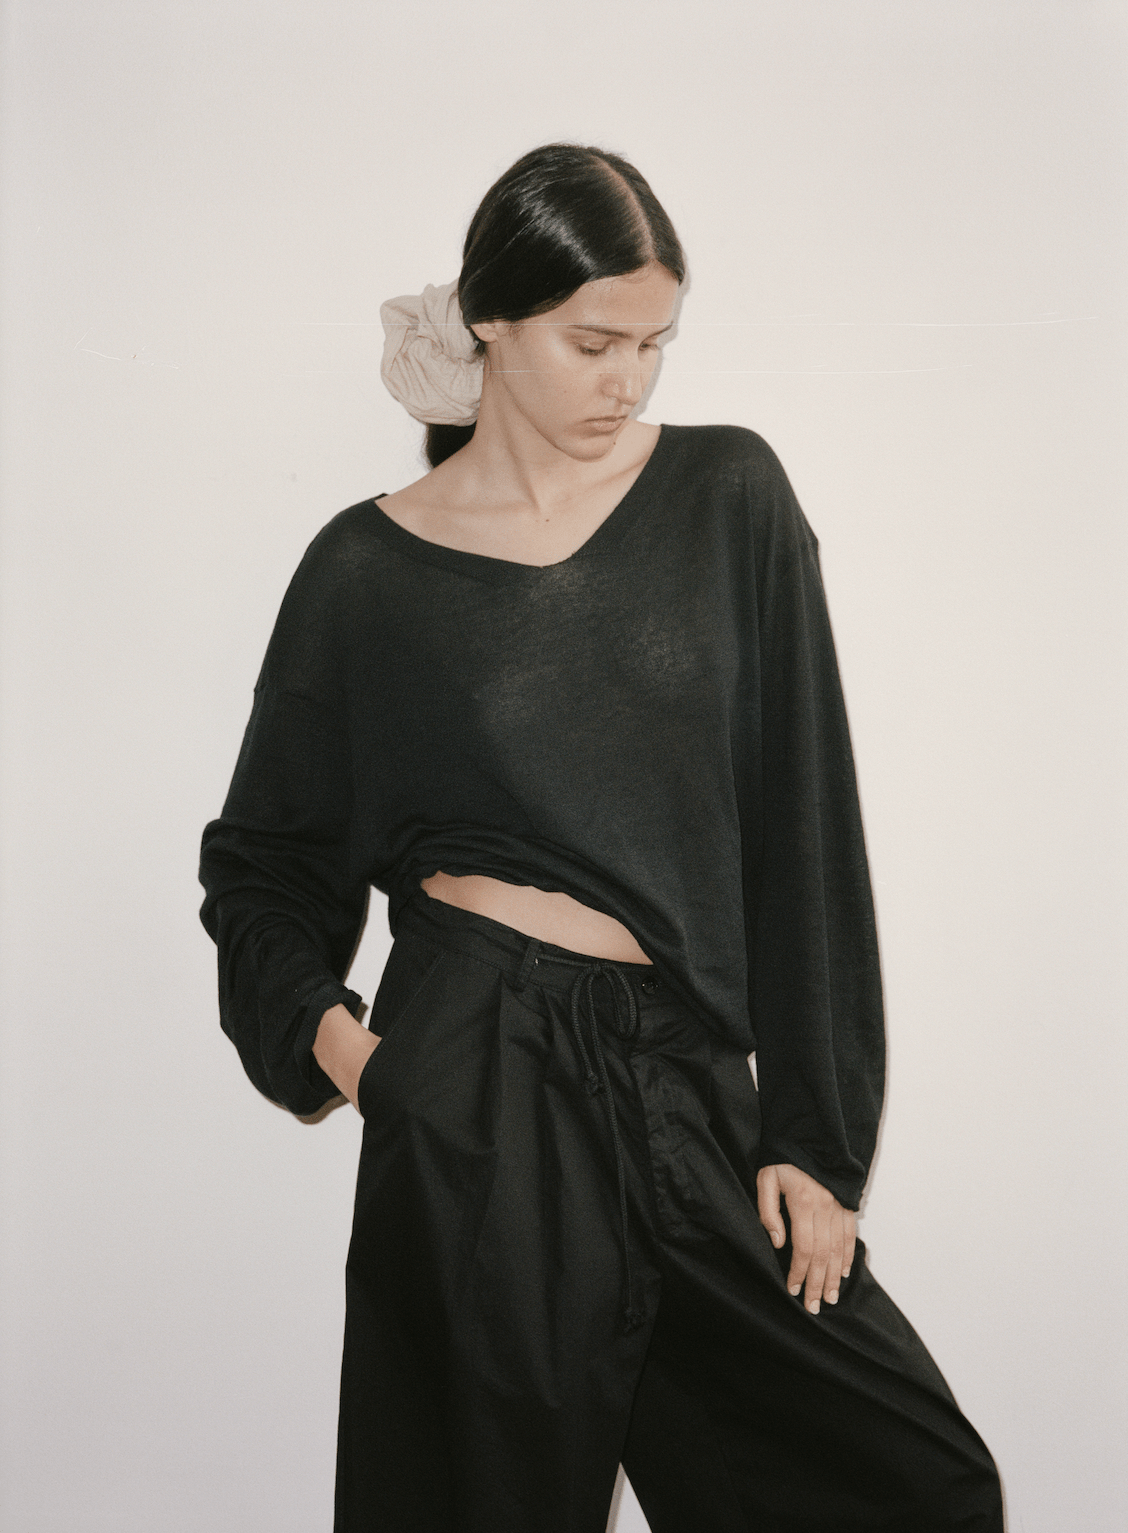 Female model wears the Deiji Studios Loose Long Sleeve Knitted Top in black, styled with the Cotton Pant in black and Scrunchie in Sand Stripe worn in hair. Knit top shows light, open weave and subtle woven neckline detail.